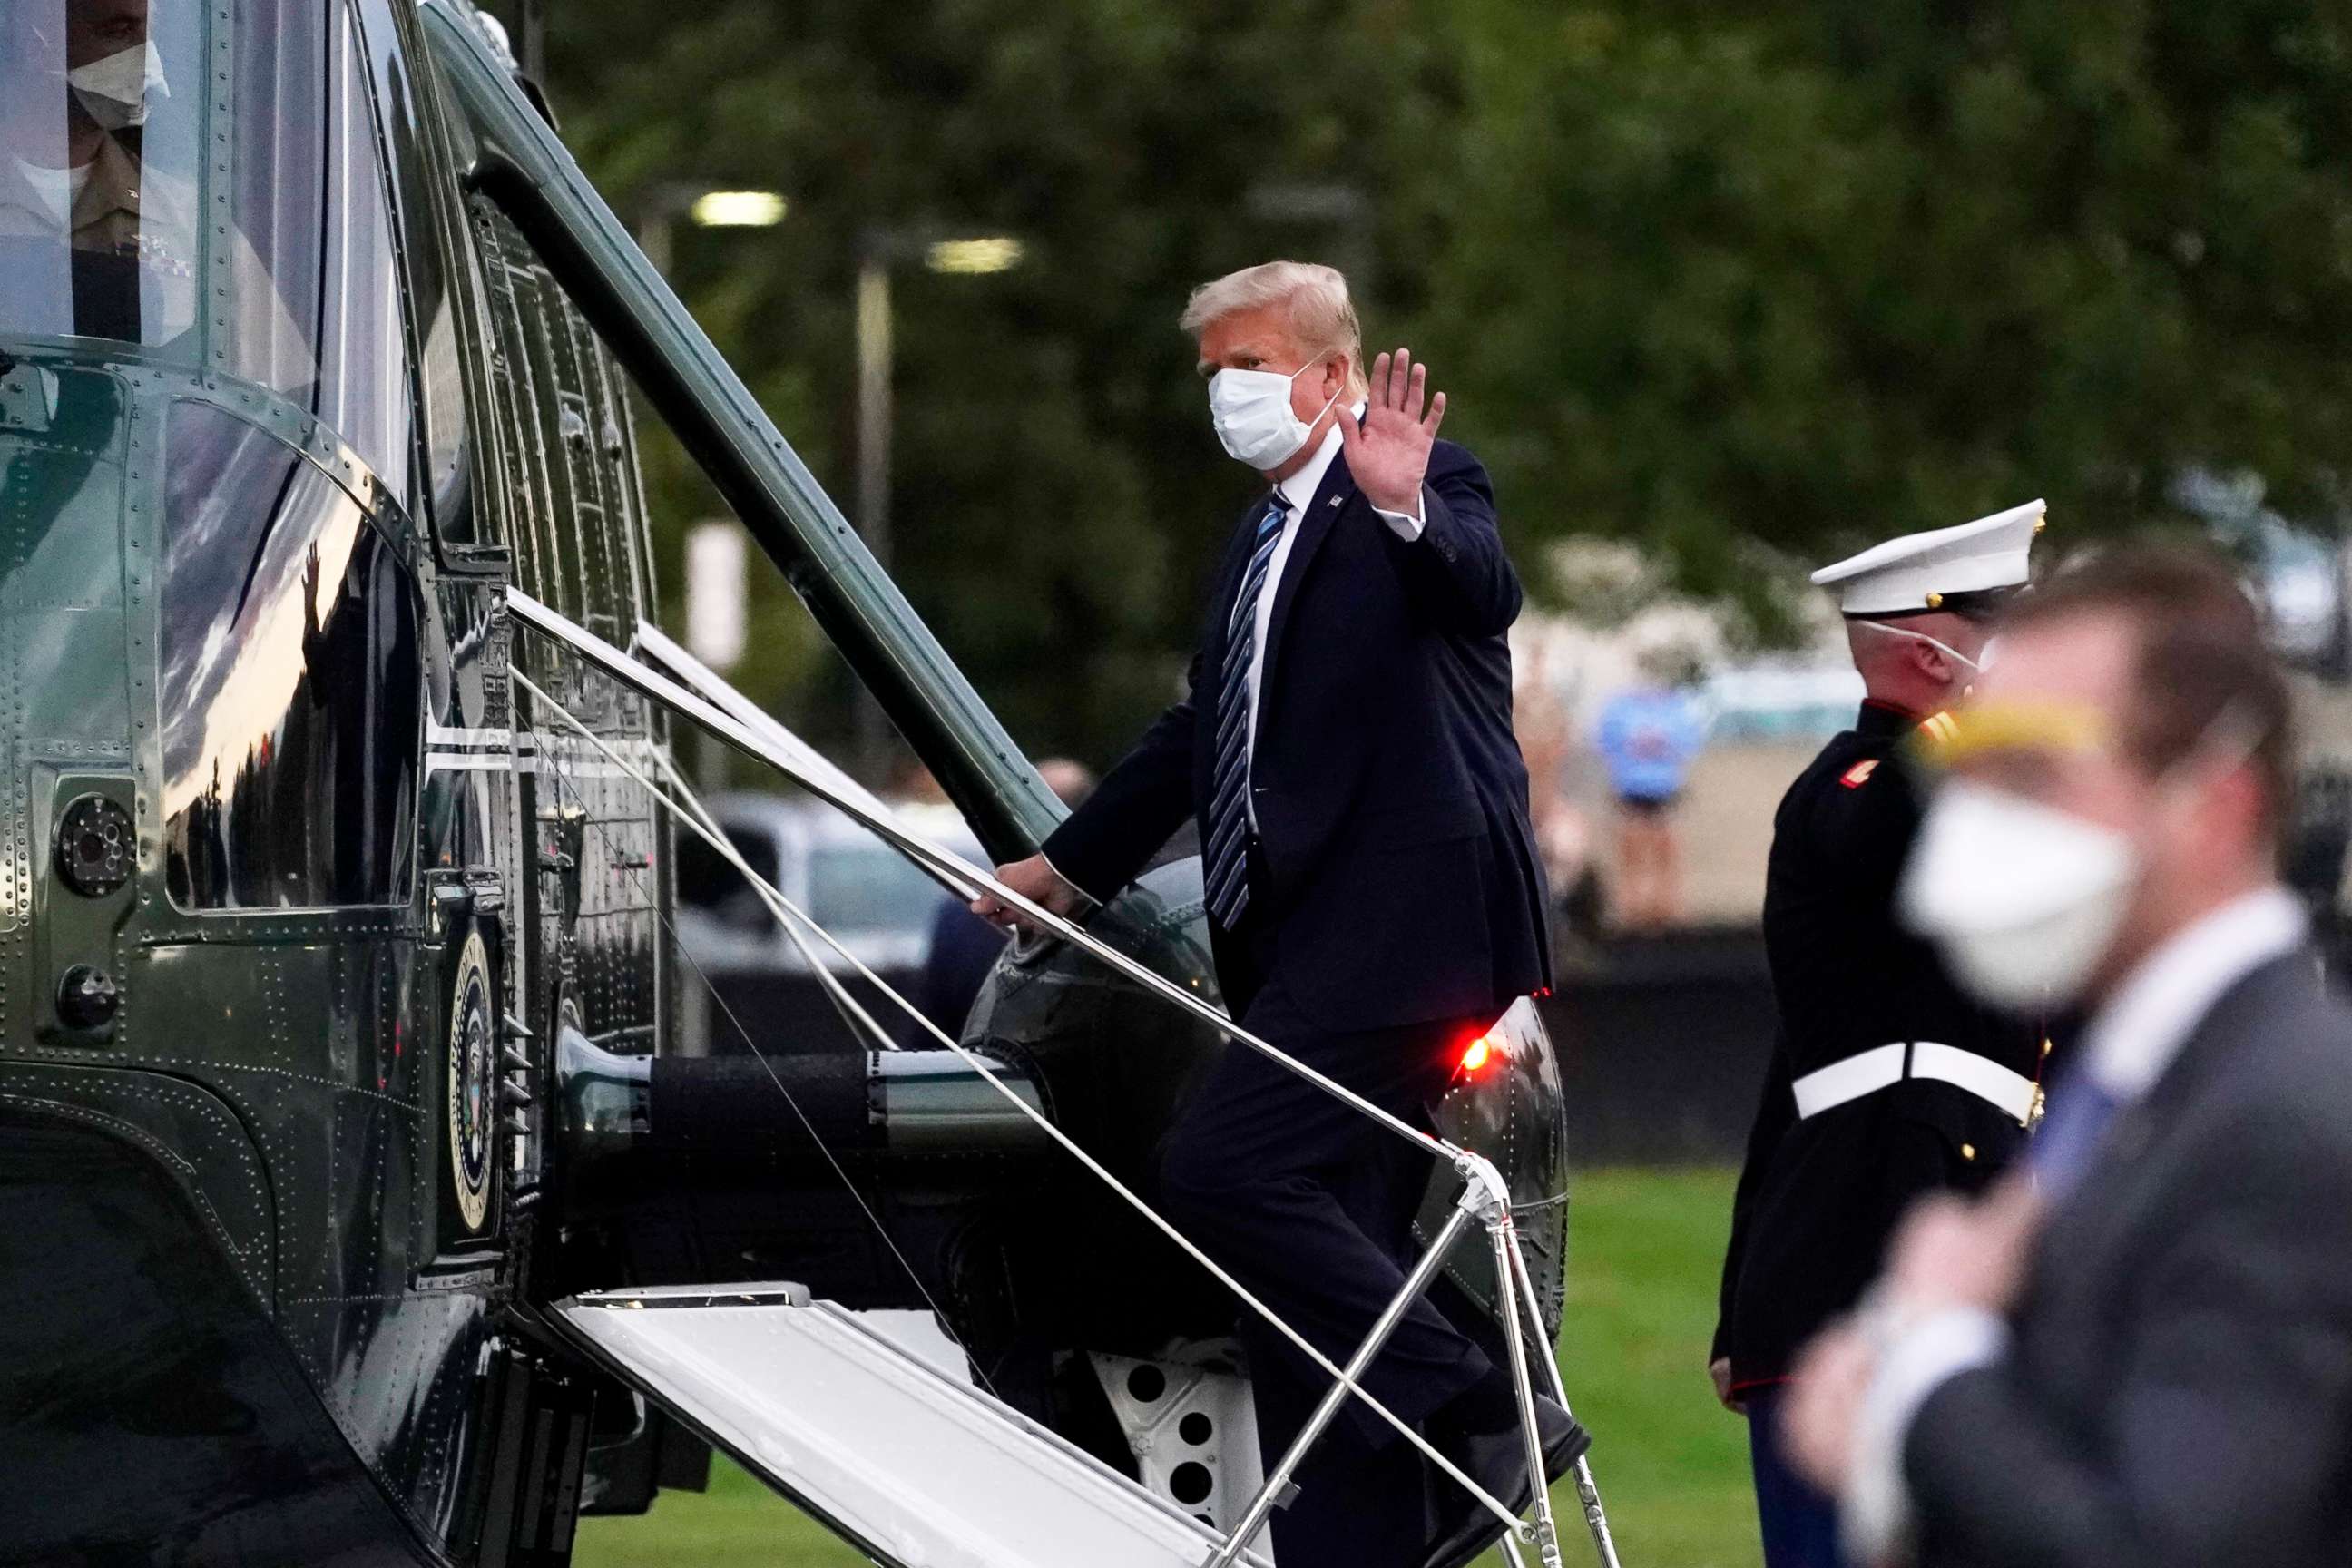 PHOTO: President Donald Trump boards Marine One at Walter Reed National Military Medical Center after receiving treatment for coronavirus in Bethesda, Md.